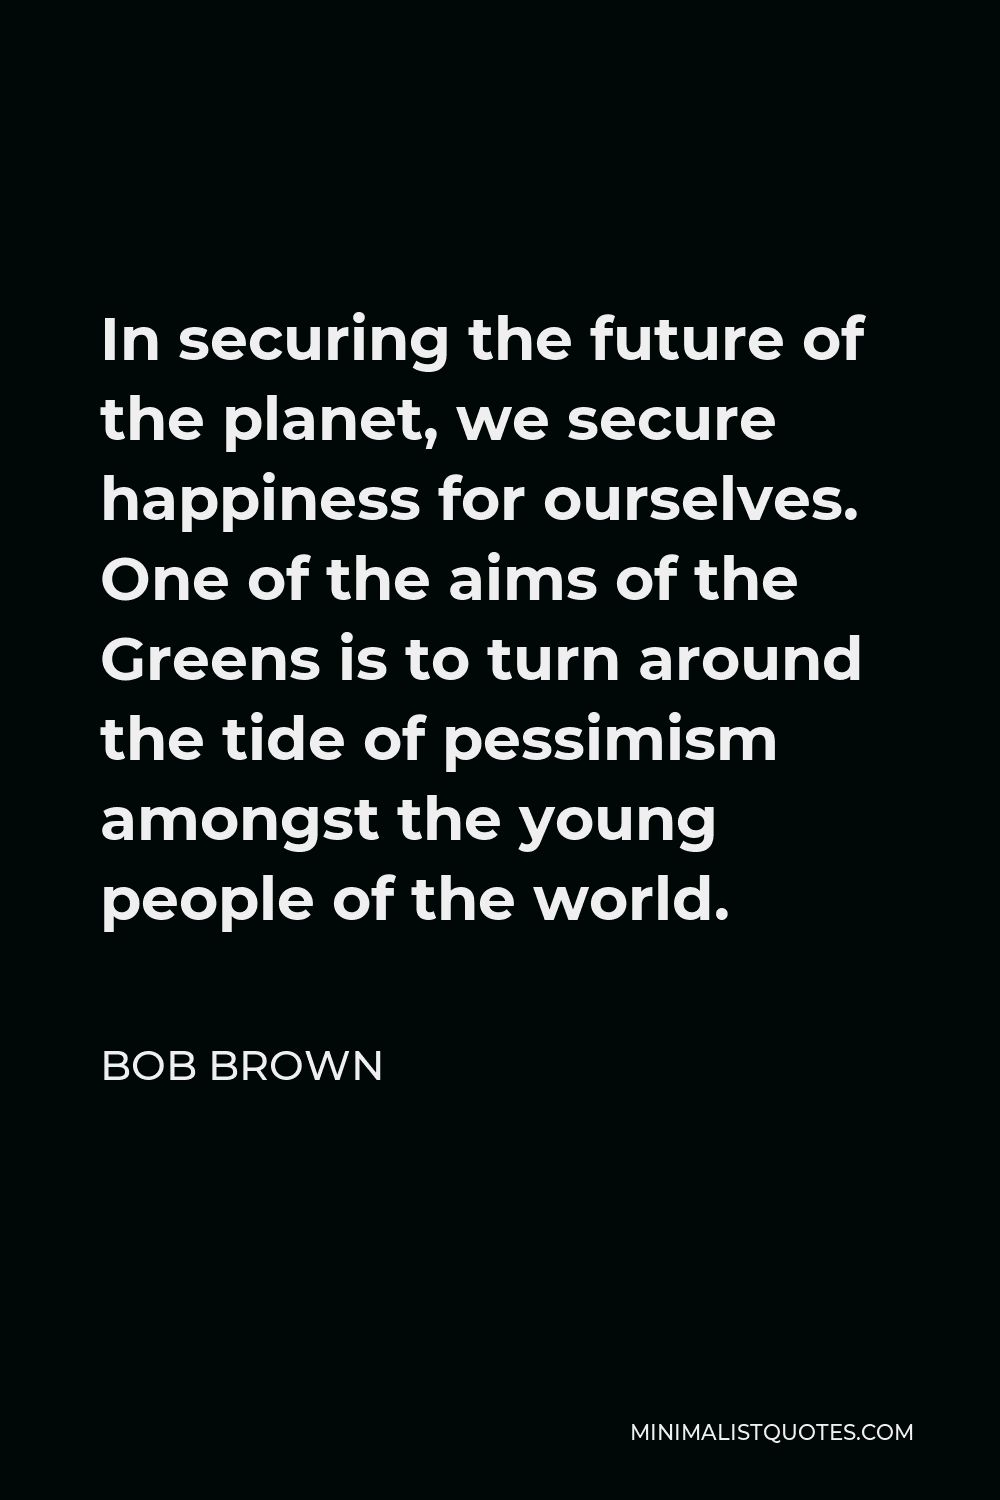 Bob Brown Quote - In securing the future of the planet, we secure happiness for ourselves. One of the aims of the Greens is to turn around the tide of pessimism amongst the young people of the world.